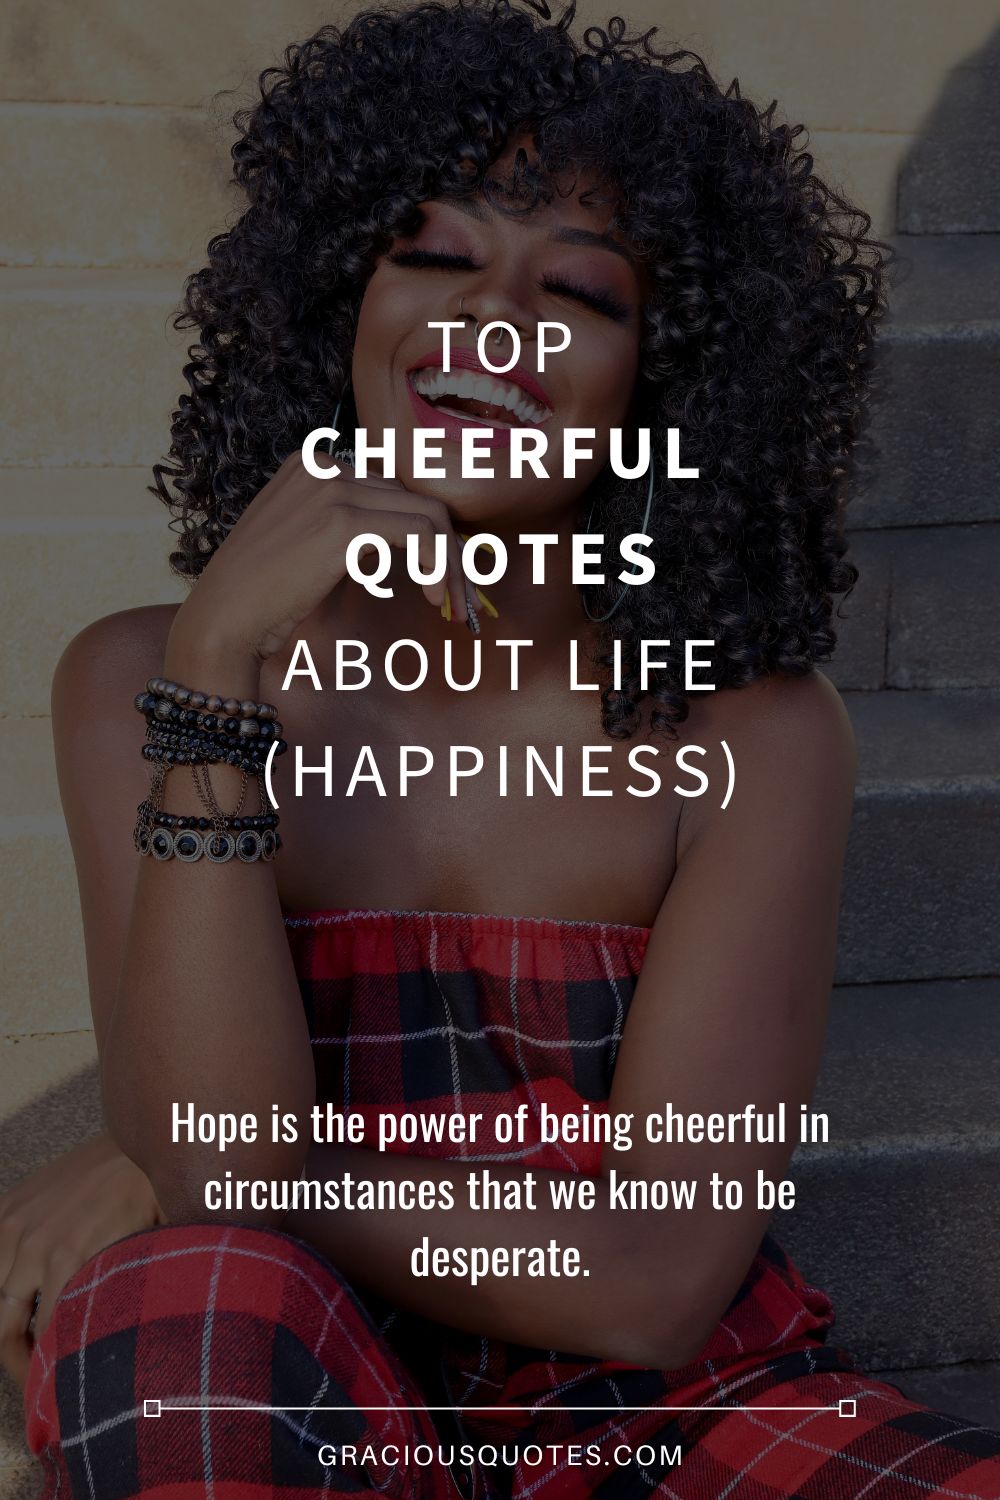 Top Cheerful Quotes About Life (HAPPINESS) - Gracious Quotes